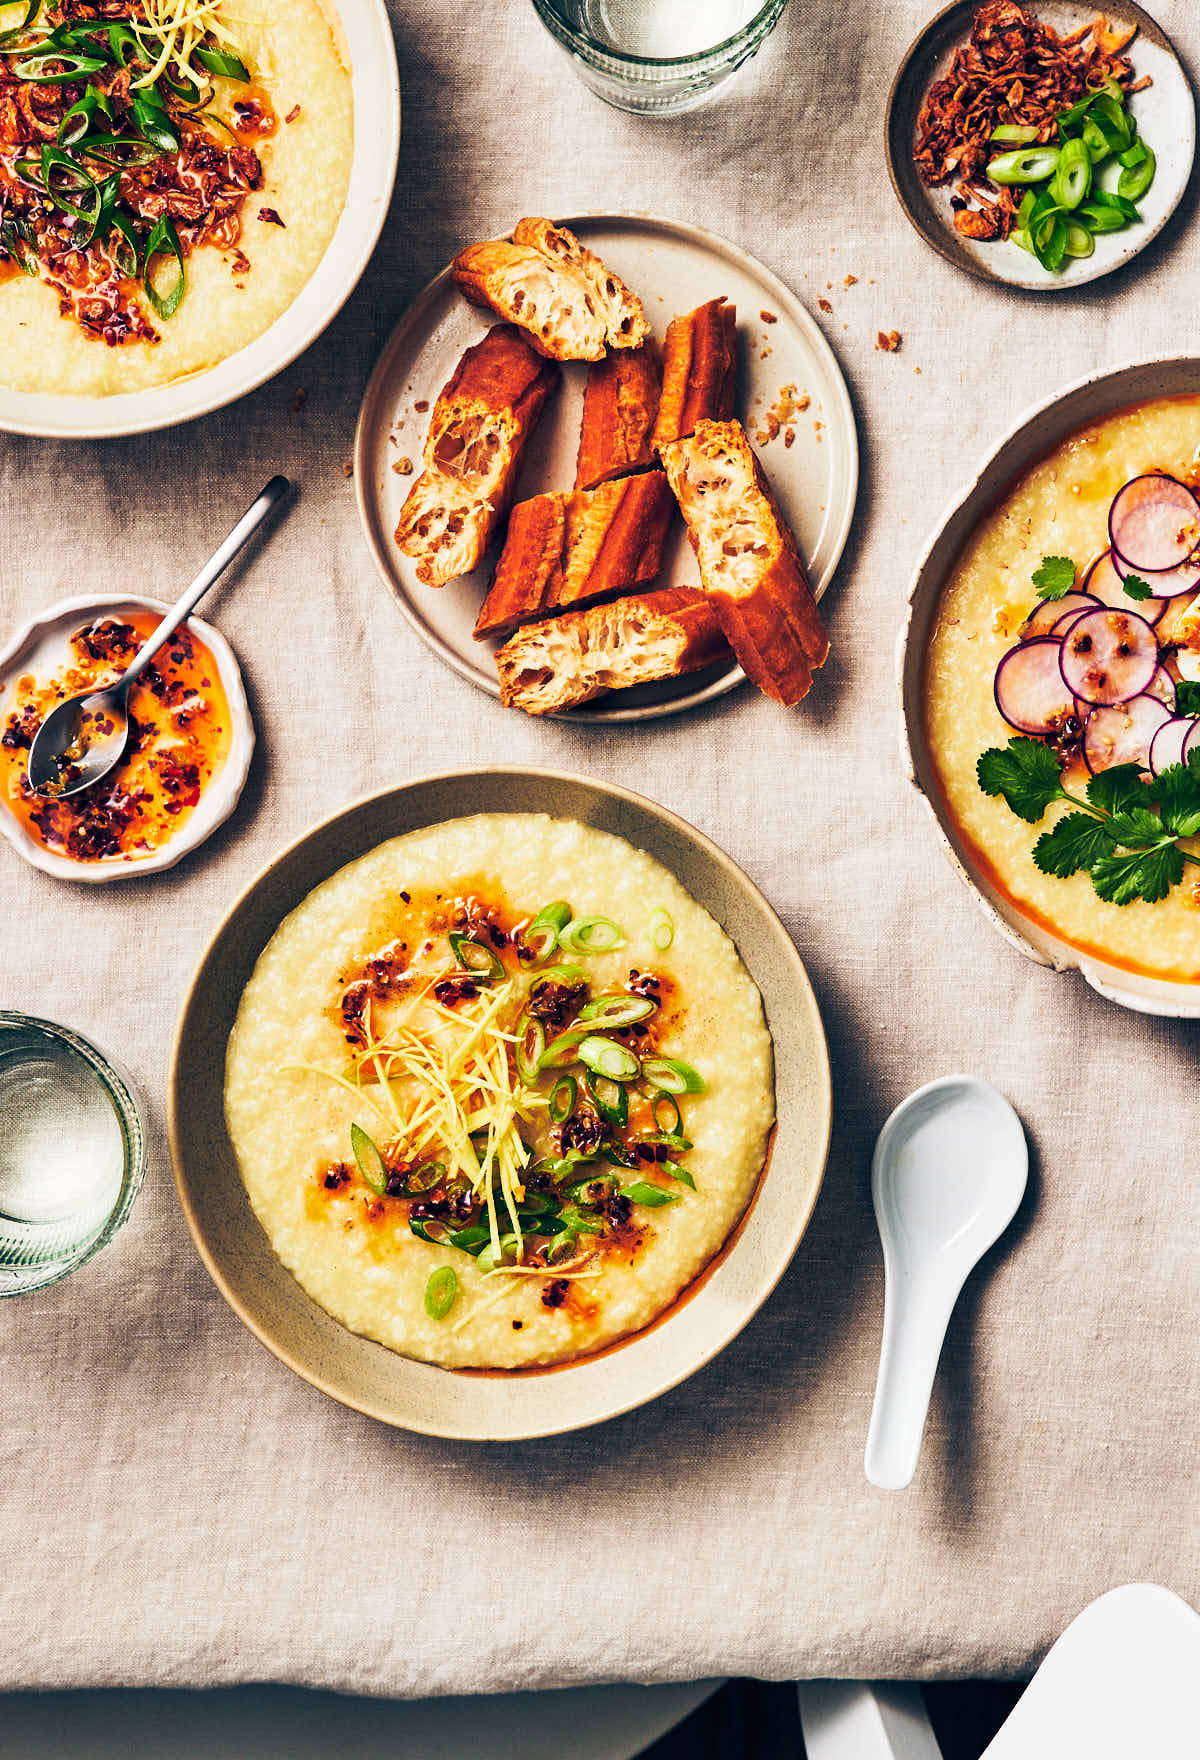 3 bowls of vegan congee with different toppings on a dining table, with a plate of Chinese donuts (youtiao) and glasses of water